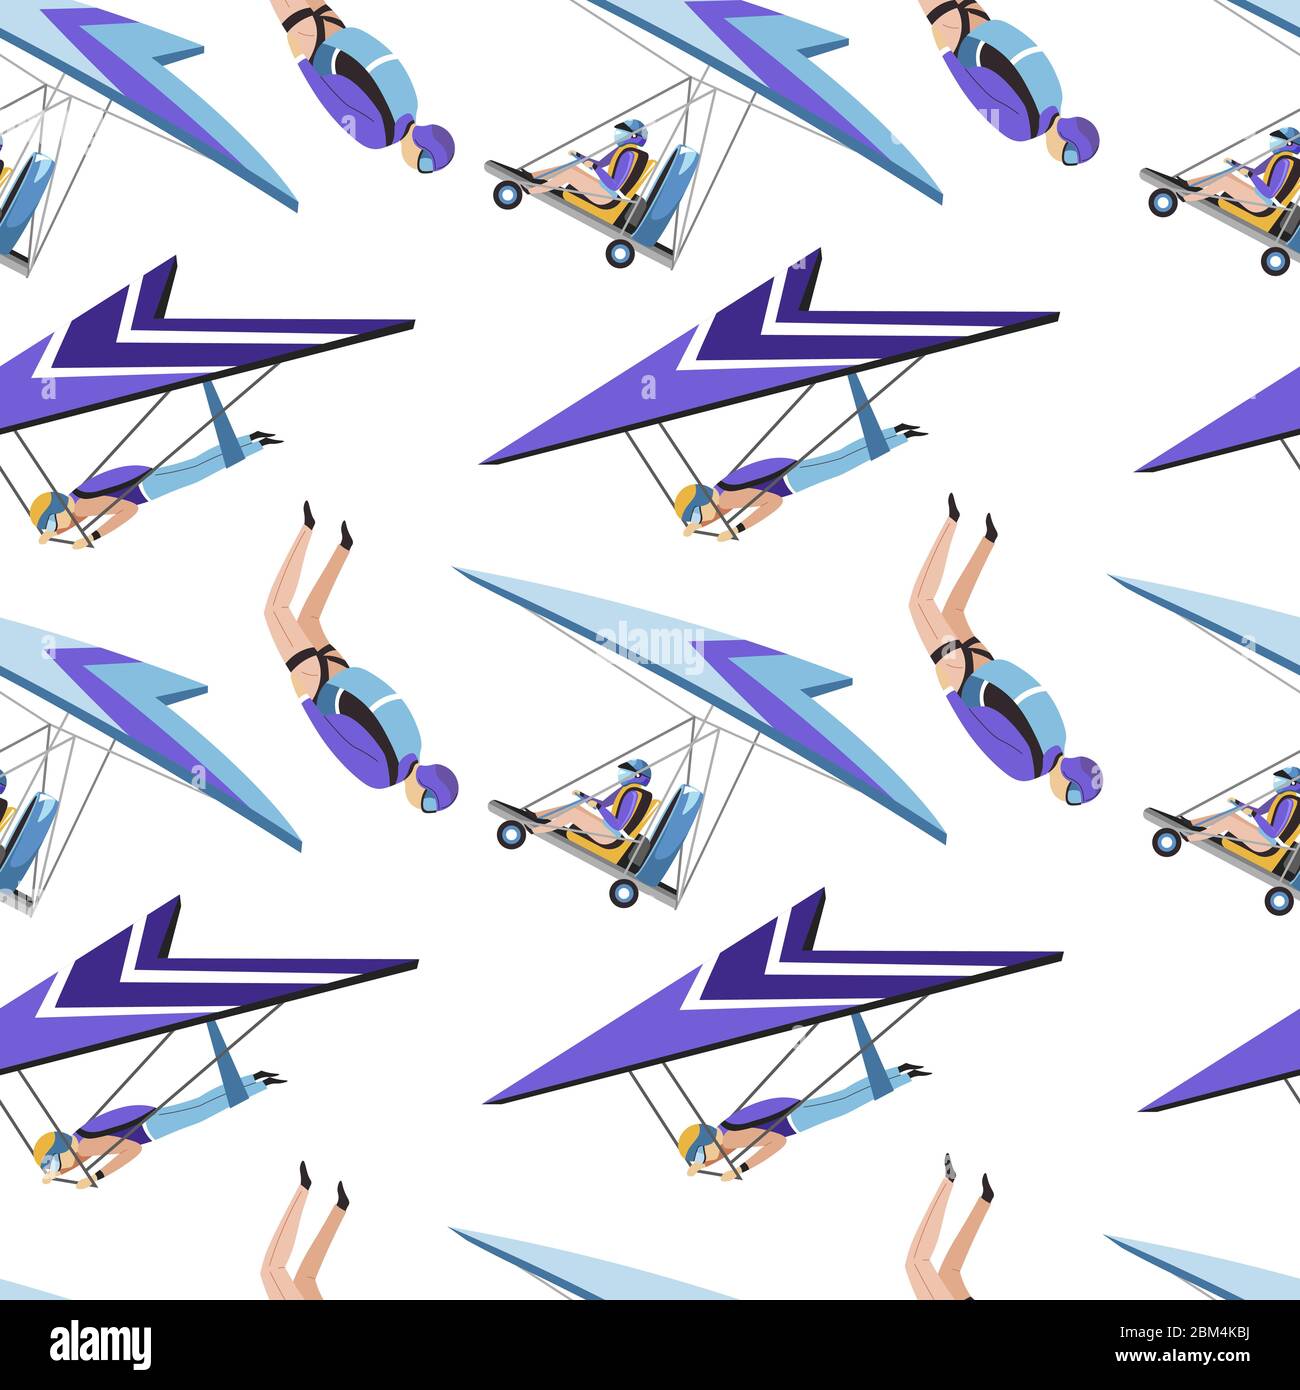 Hang gliding and parachuting, extreme sports seamless pattern Stock Vector